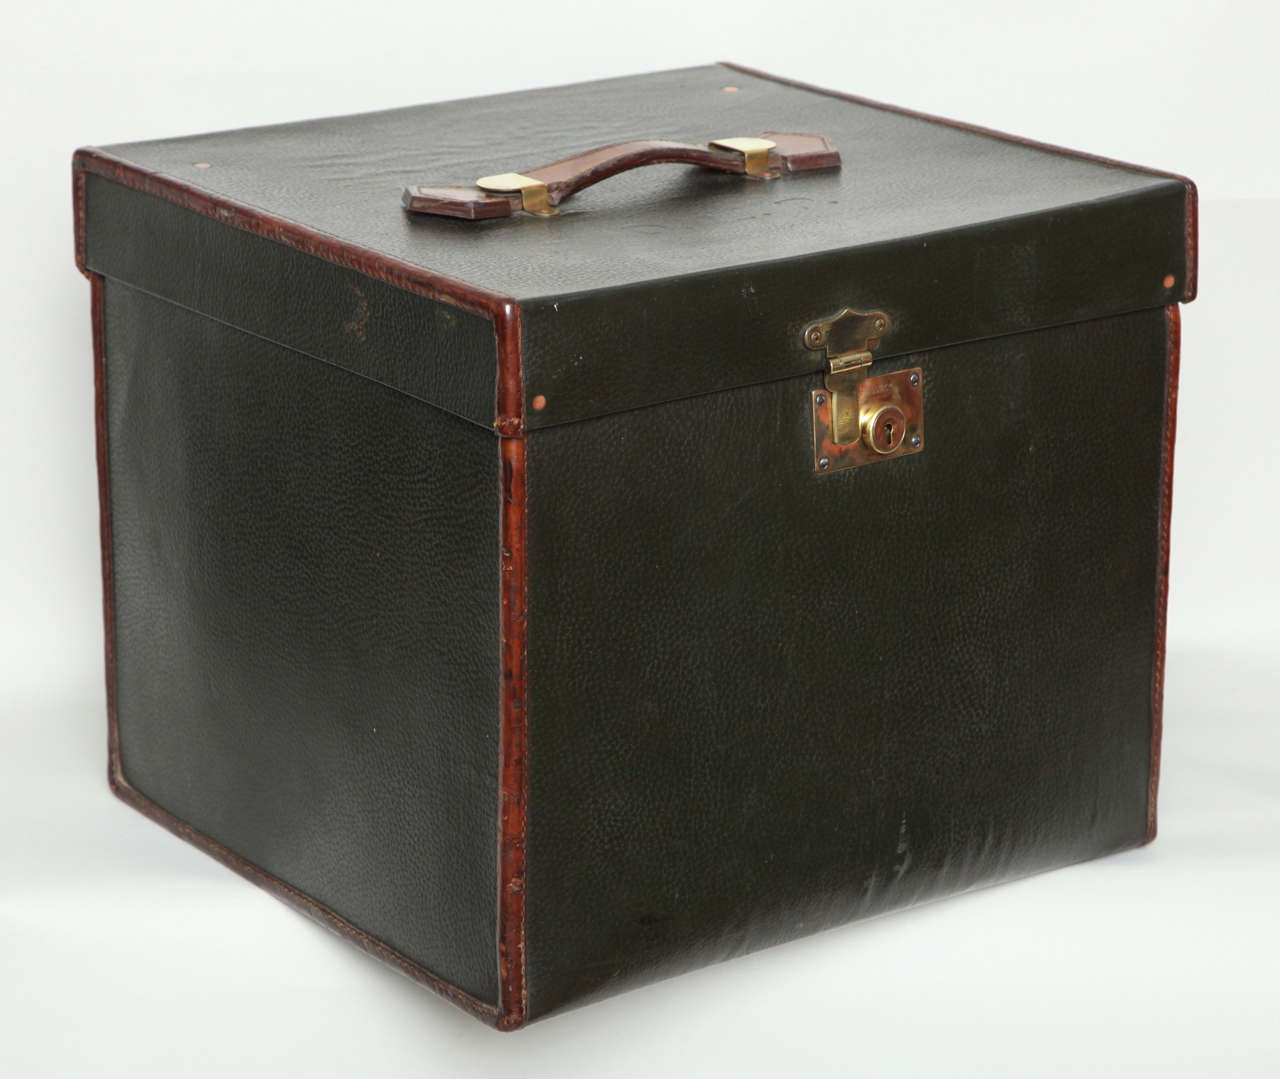 Very fine pigskin and leather traveling chest by Cleghorn of Edinburgh, circa 1920 with original hardware, fittings and makers label. Cleghorn's were considered one of the finest luggage manufacturers of the time and this example can be dated prior